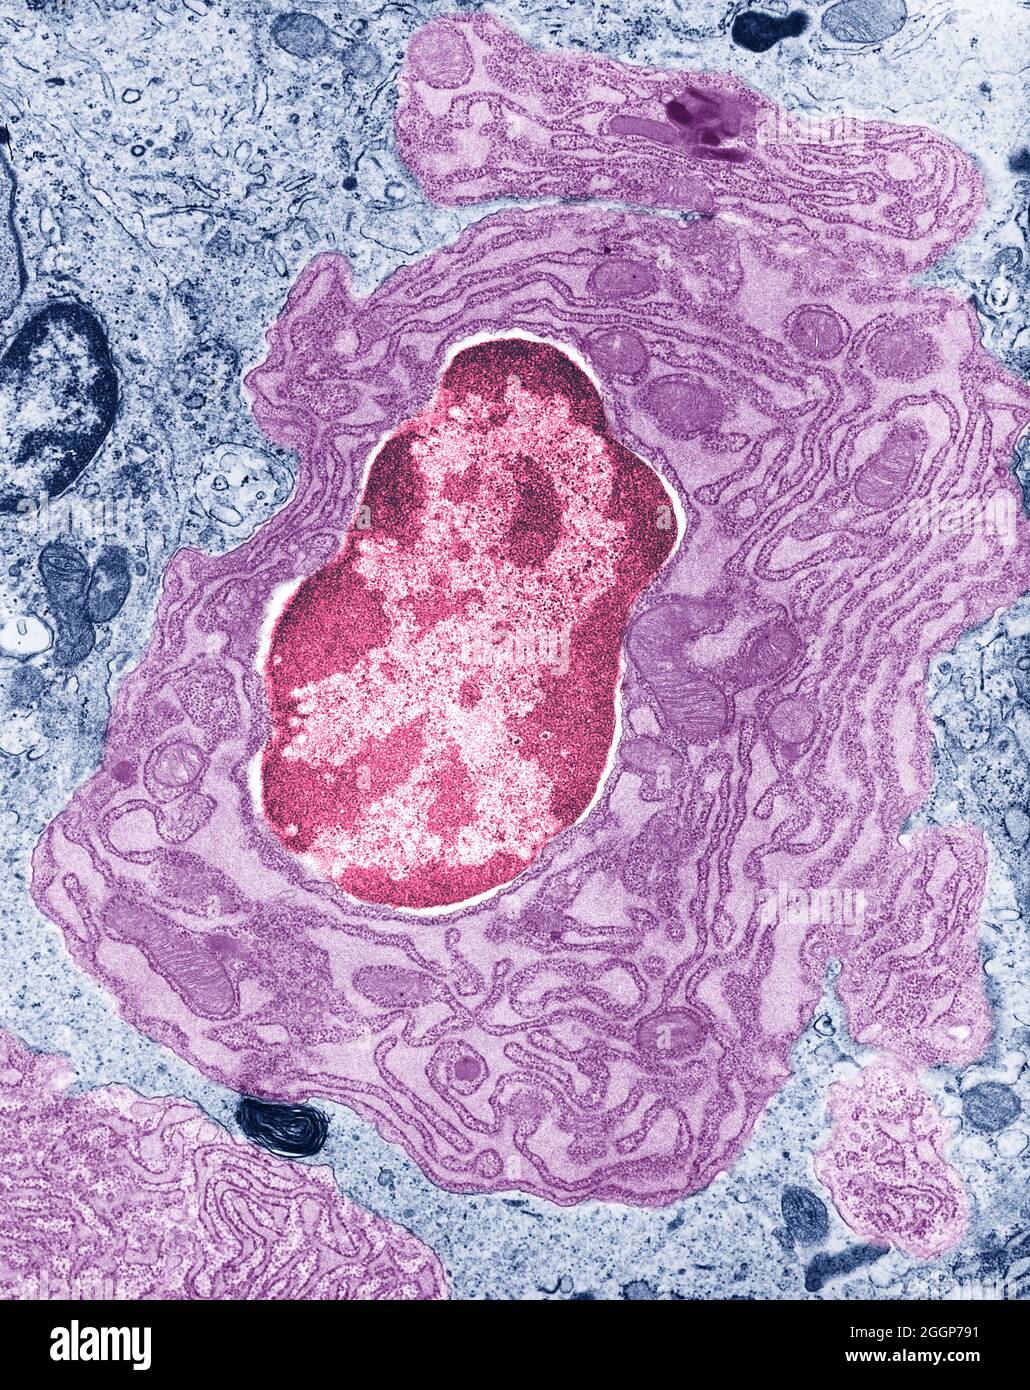 Colorized transmission electron micrograph (TEM) of intestinal cell, showing the nucleus and surrounding endoplasmic reticulum and mitochondria. Stock Photo